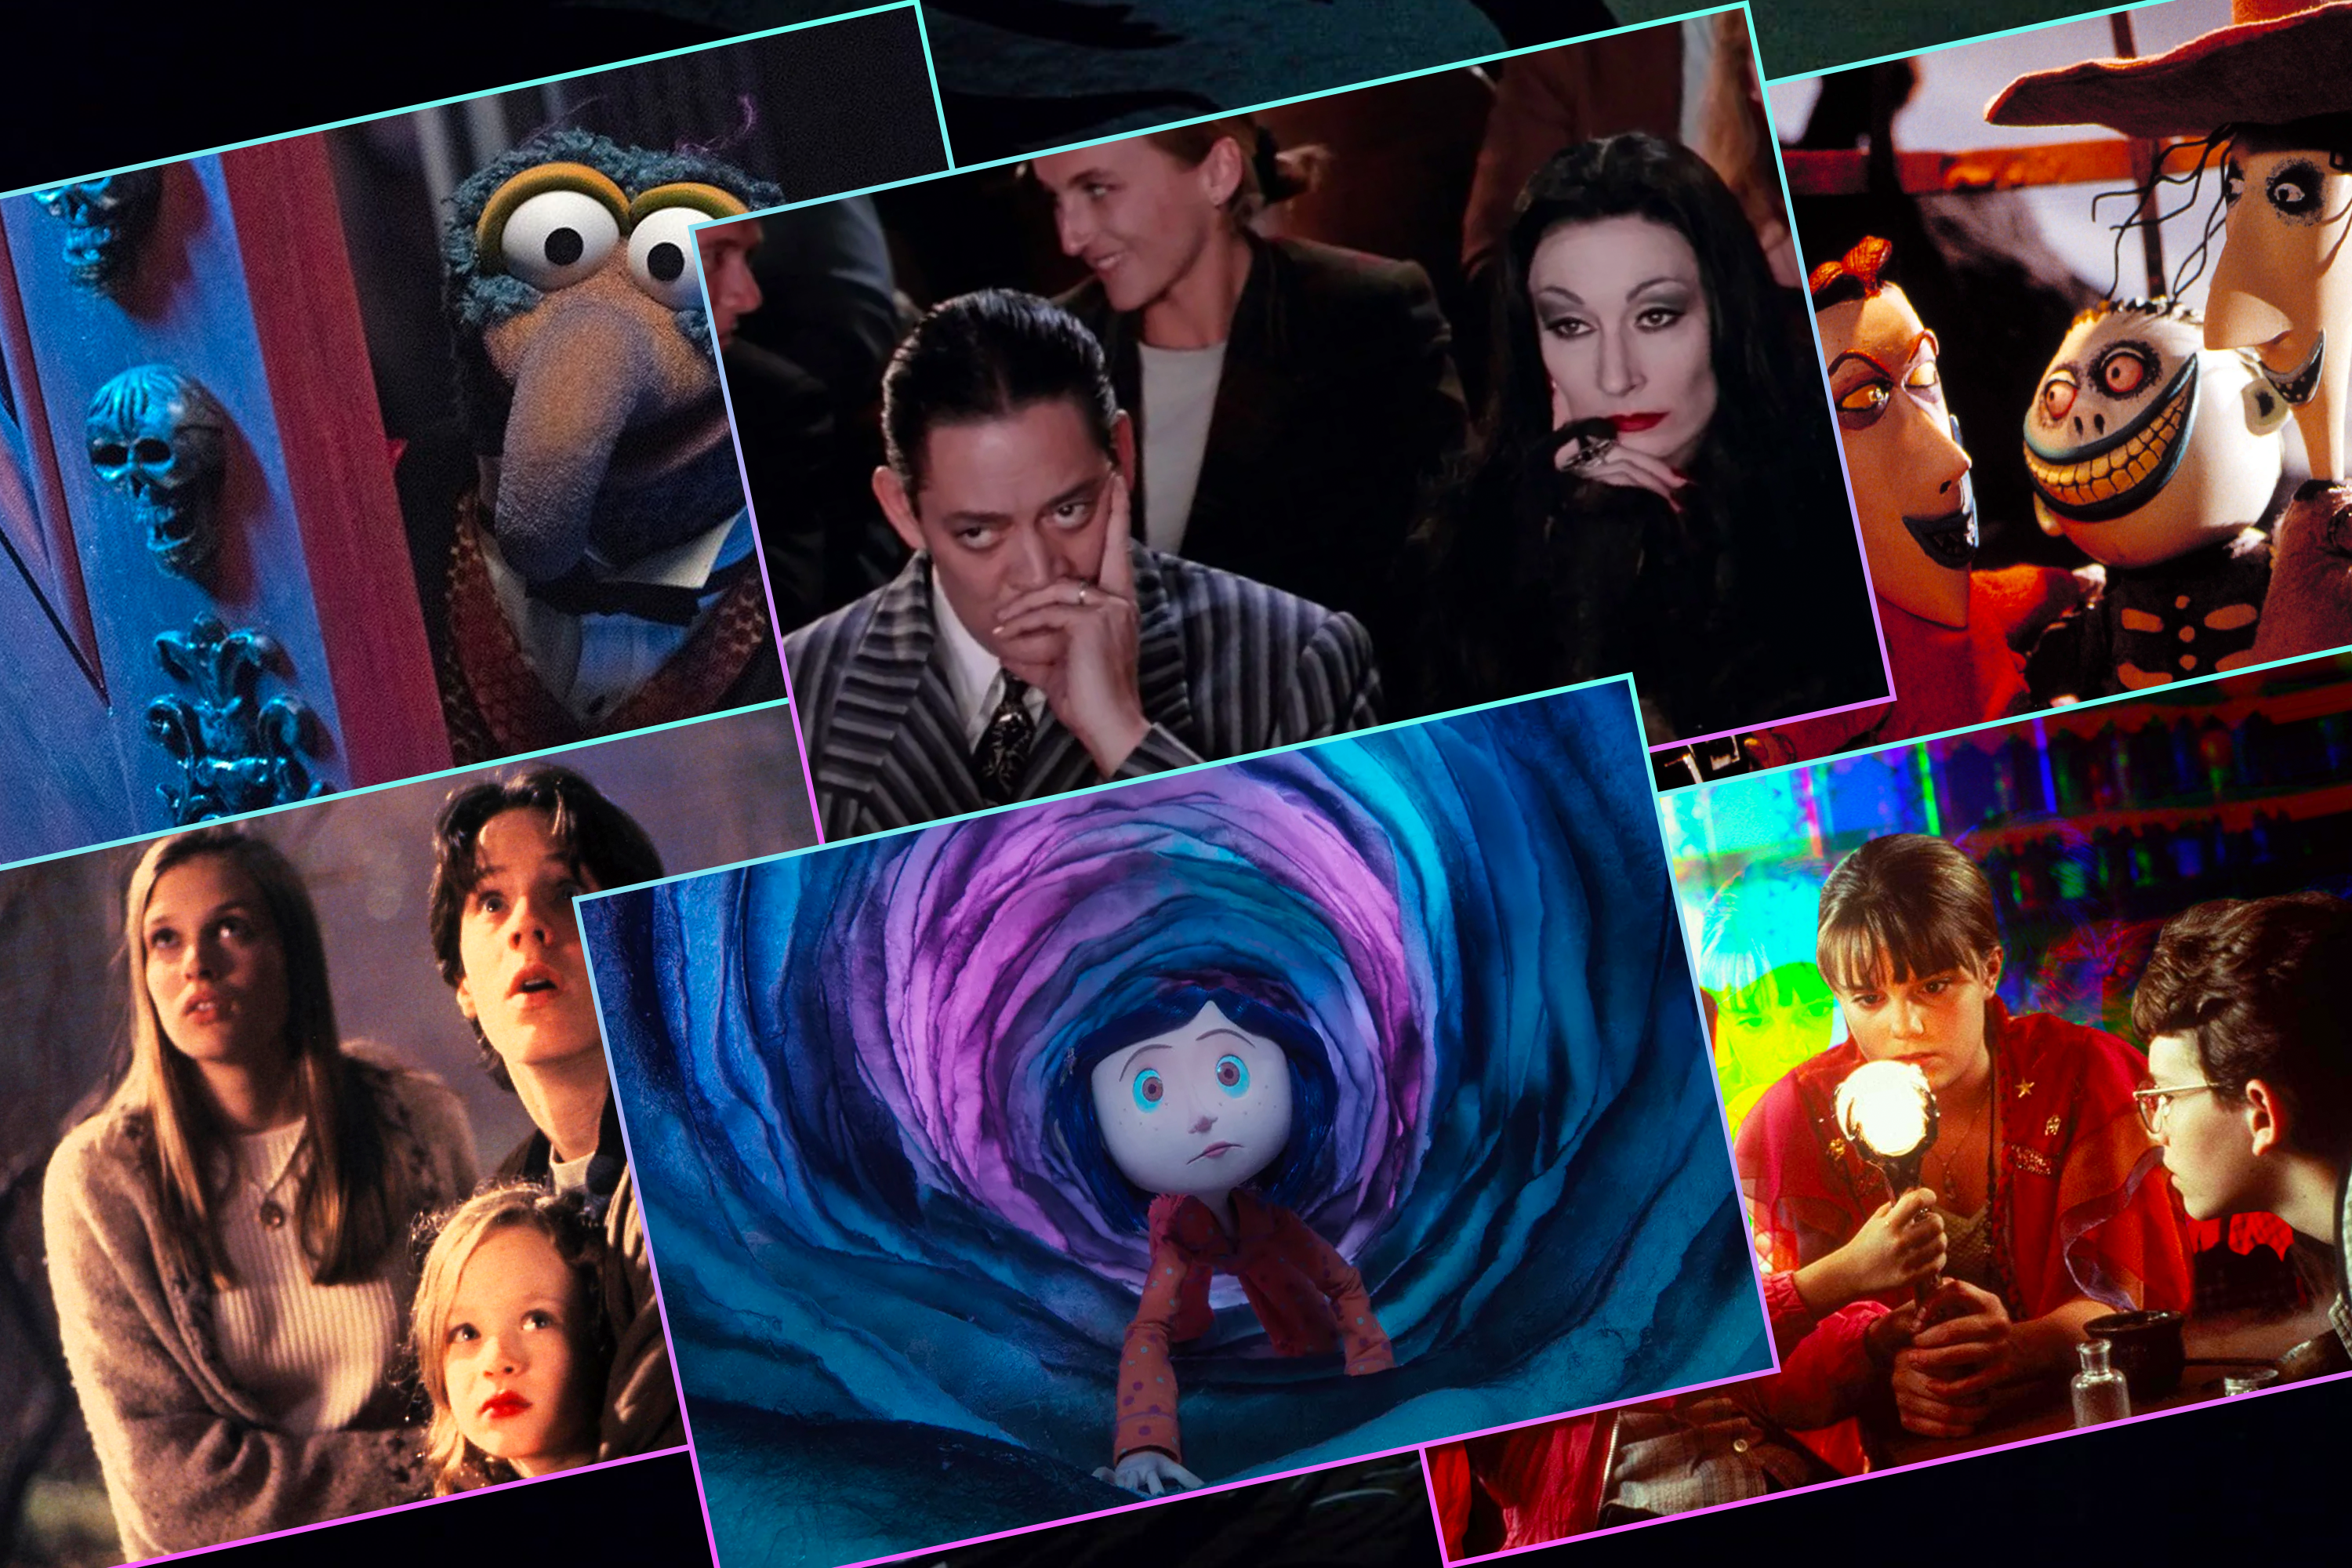 A collage of various family-friendly horror-comedies